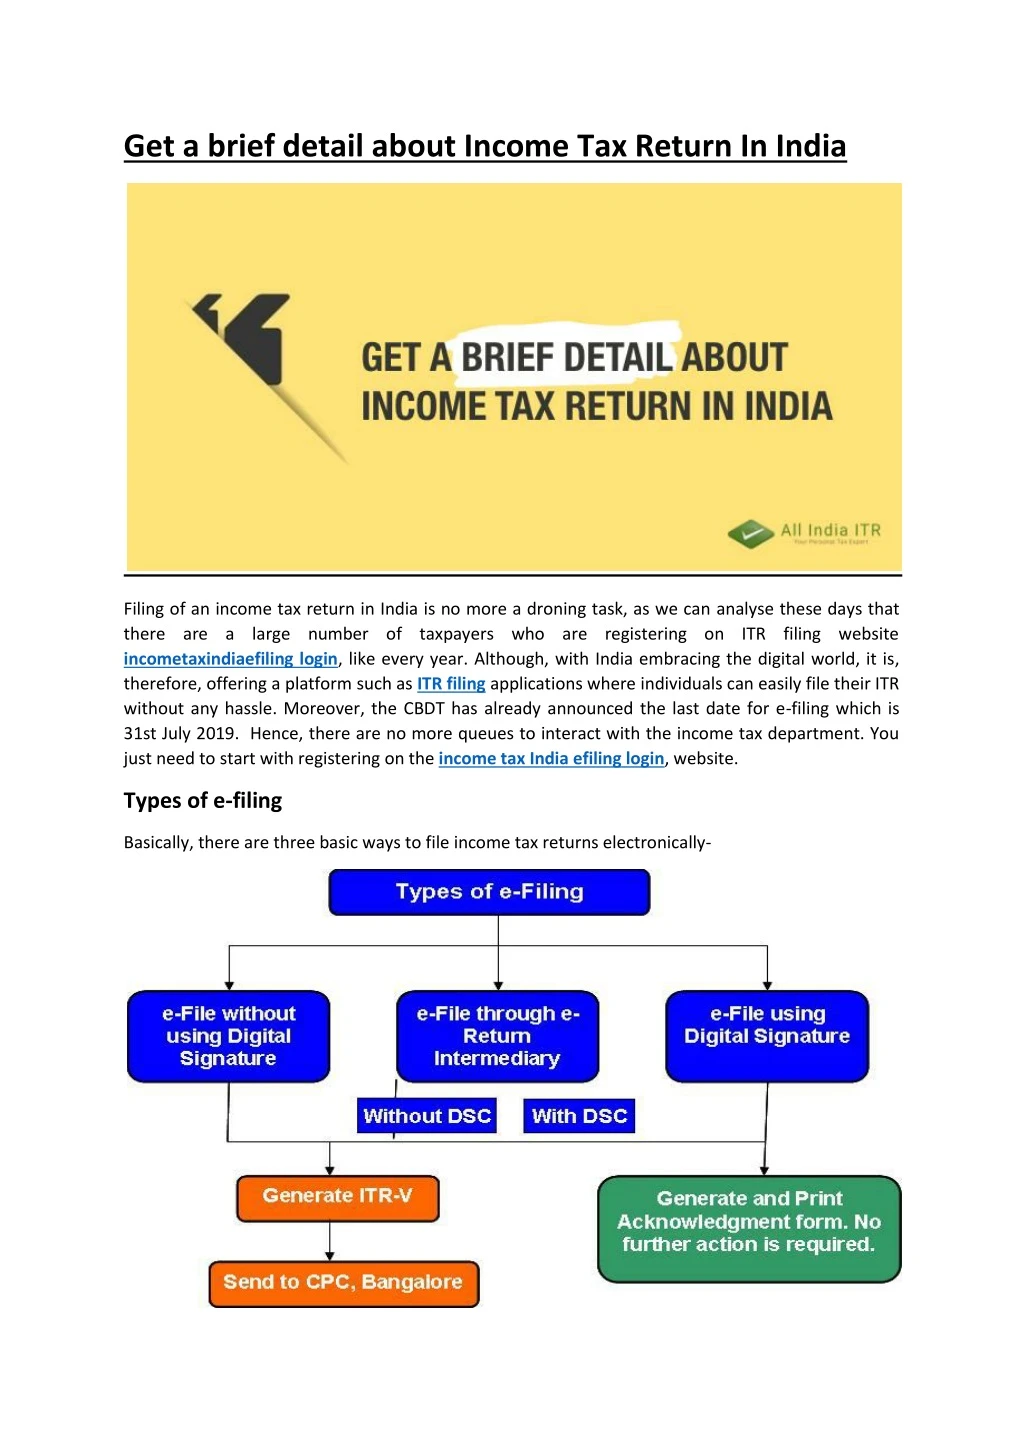 get a brief detail about income tax return